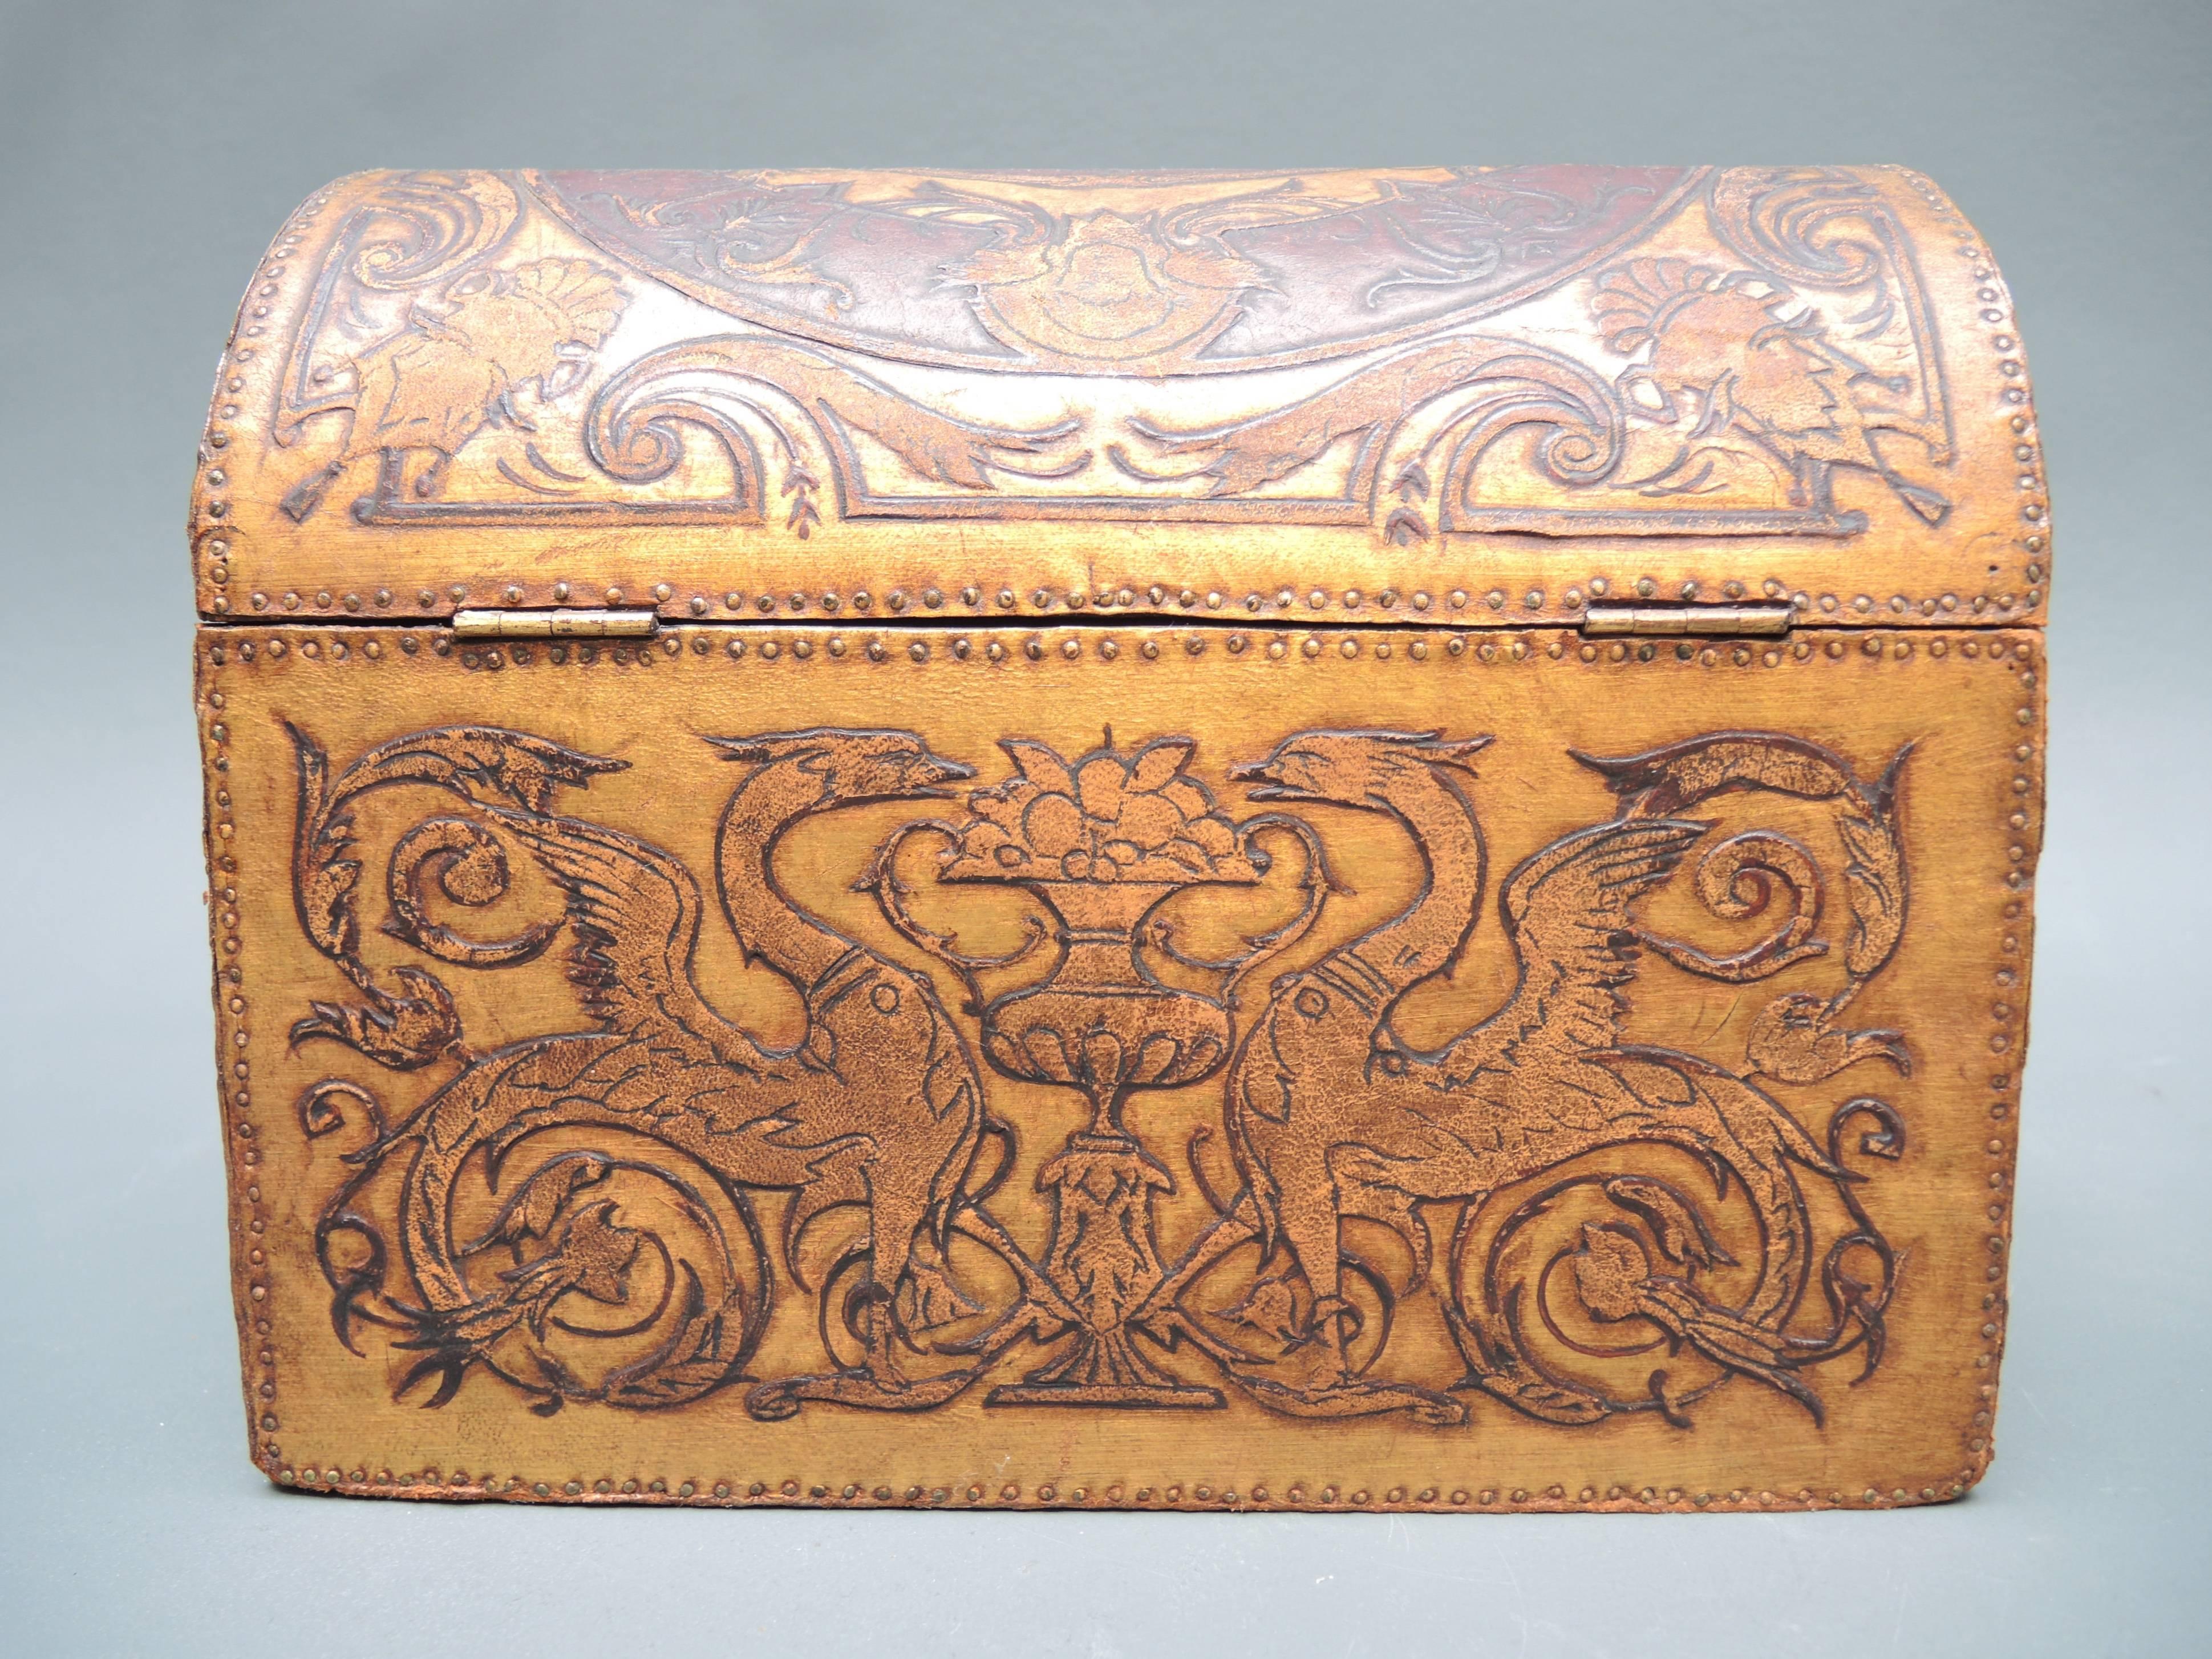 A classical shaped Flemish box covered in embossed gilt and painted leather produced by hand in Mechelen dated 1912. The ornately decorated leather fully embraces the designs and tastes of the Art Nouveau period.